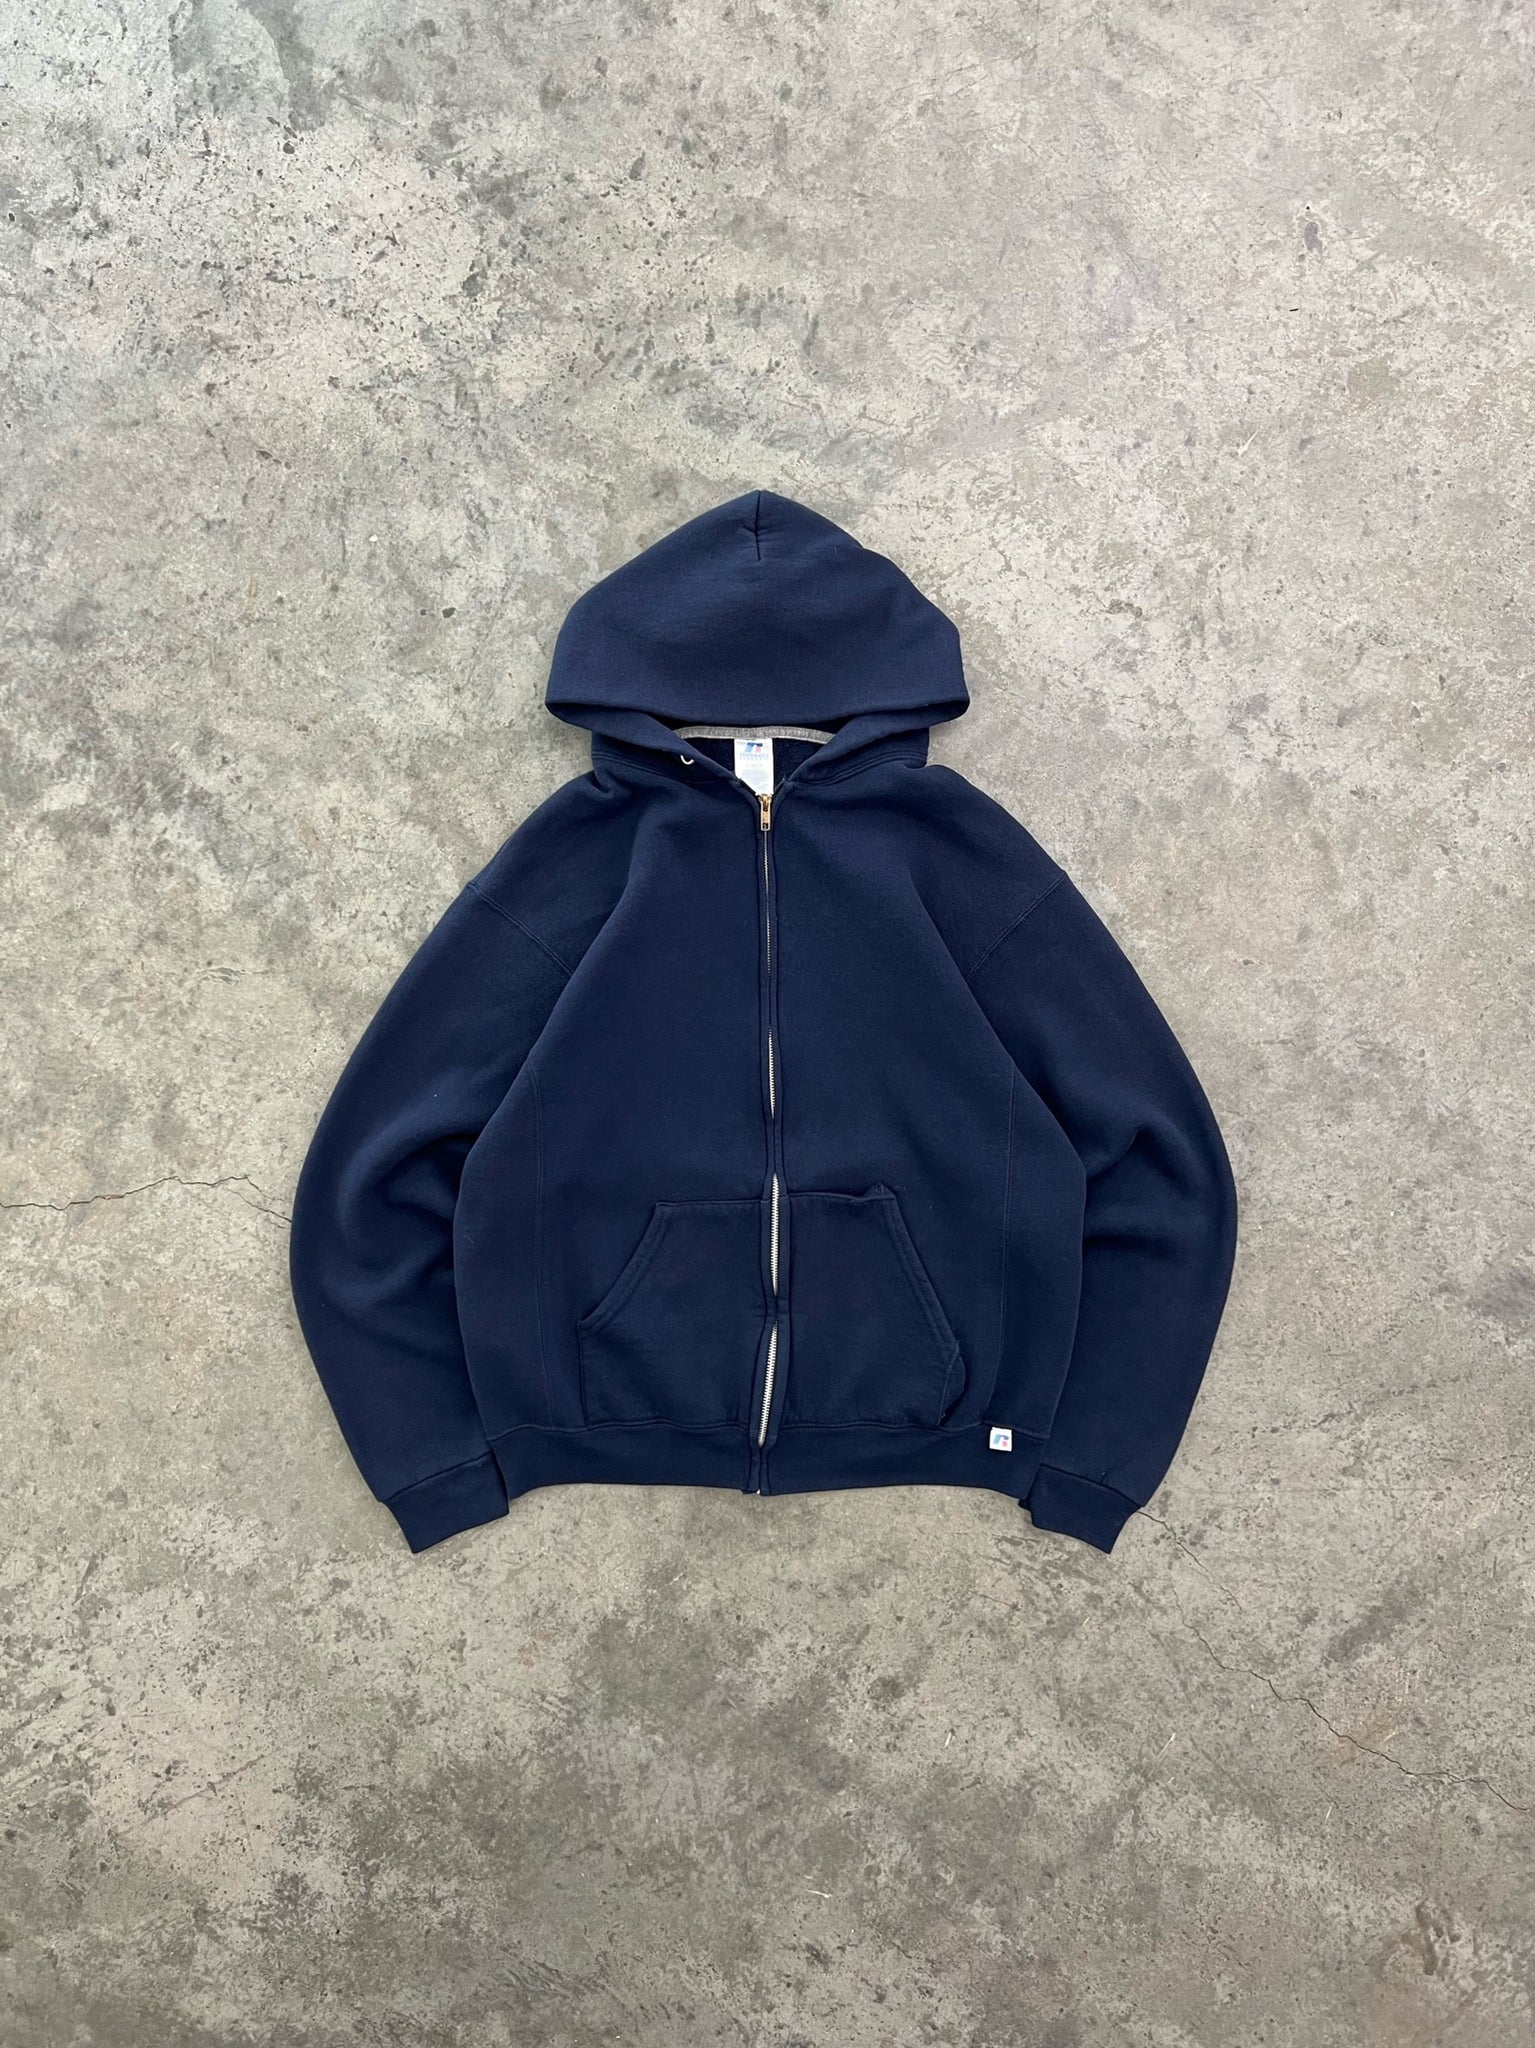 FADED NAVY RUSSELL ZIP UP HOODIE - 2000S – AKIMBO CLUB